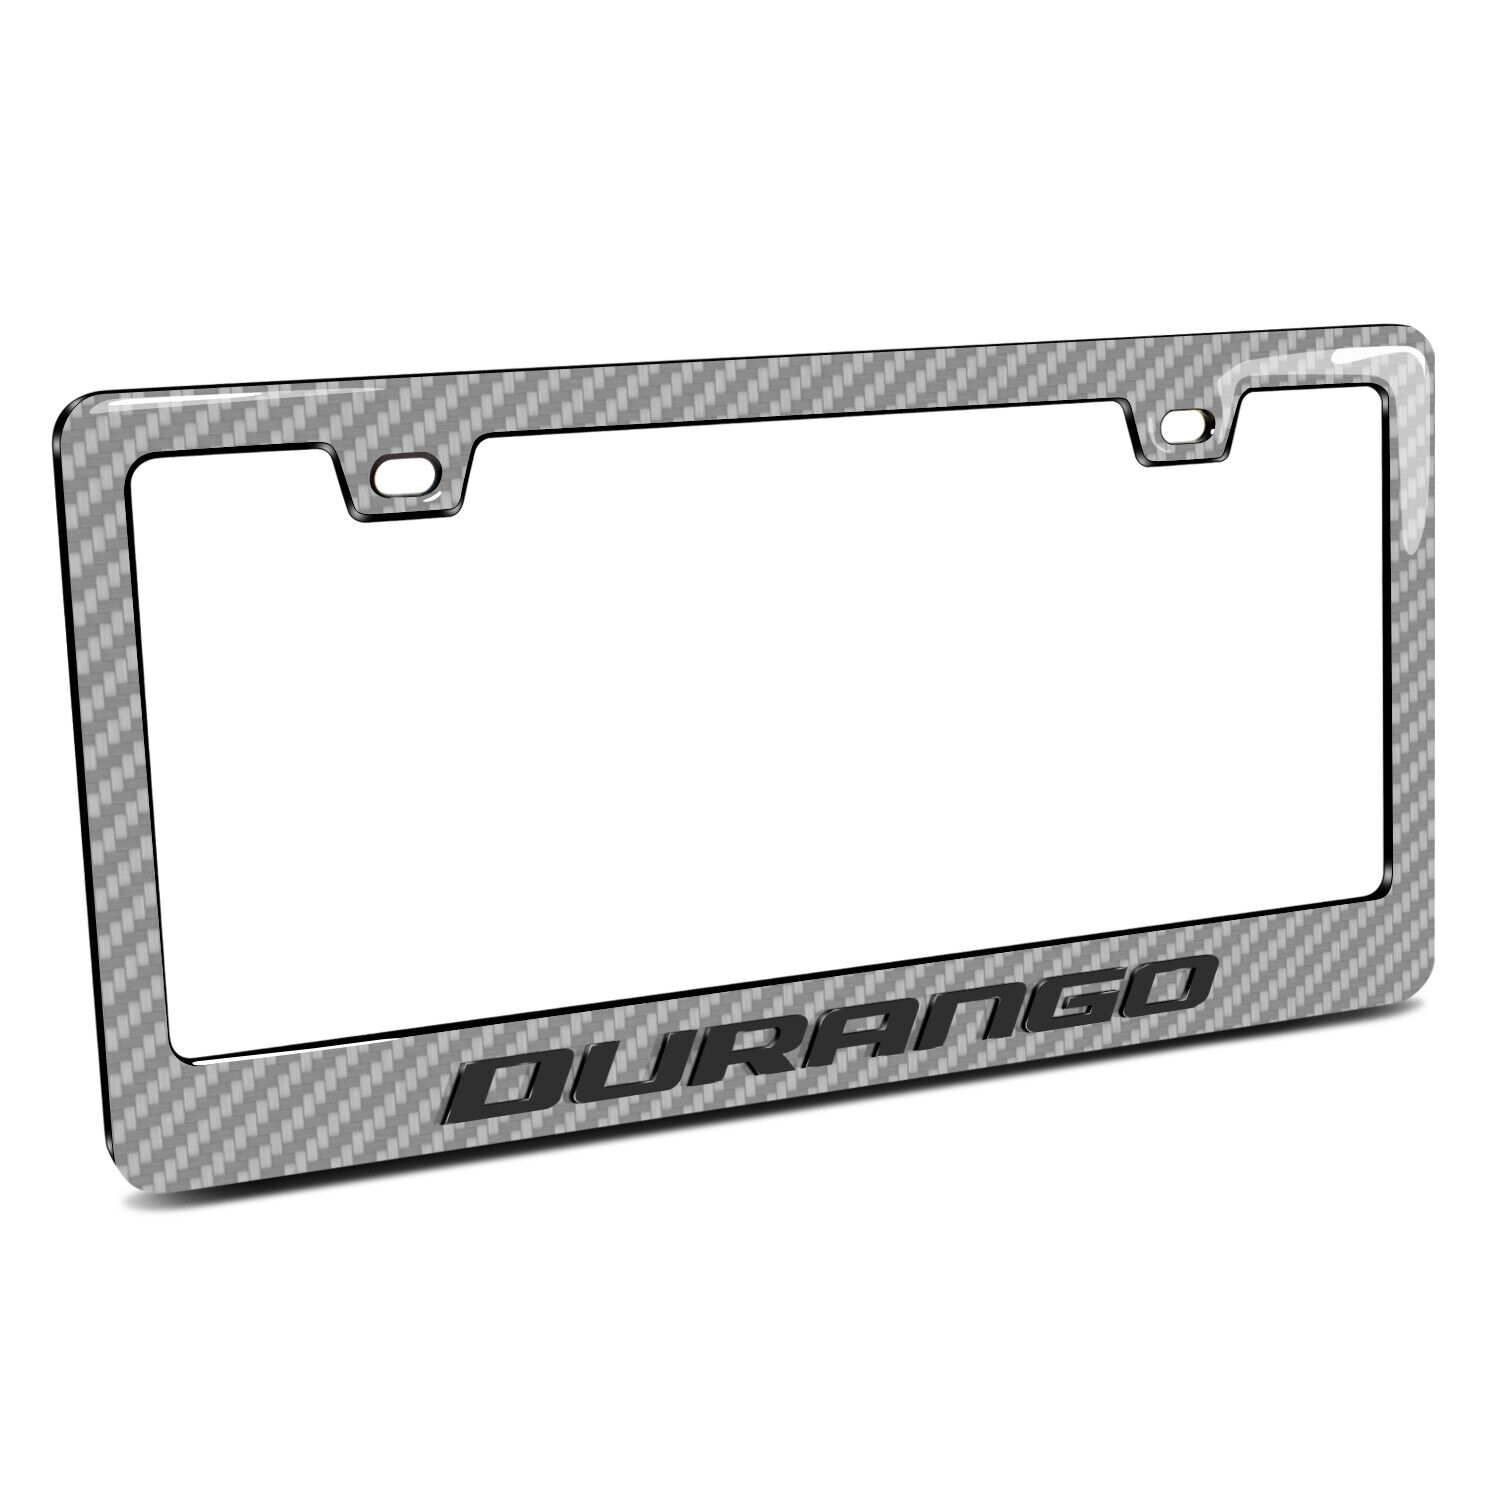 Dodge Durango in 3D Silver Real Carbon Fiber ABS  License Plate Frame